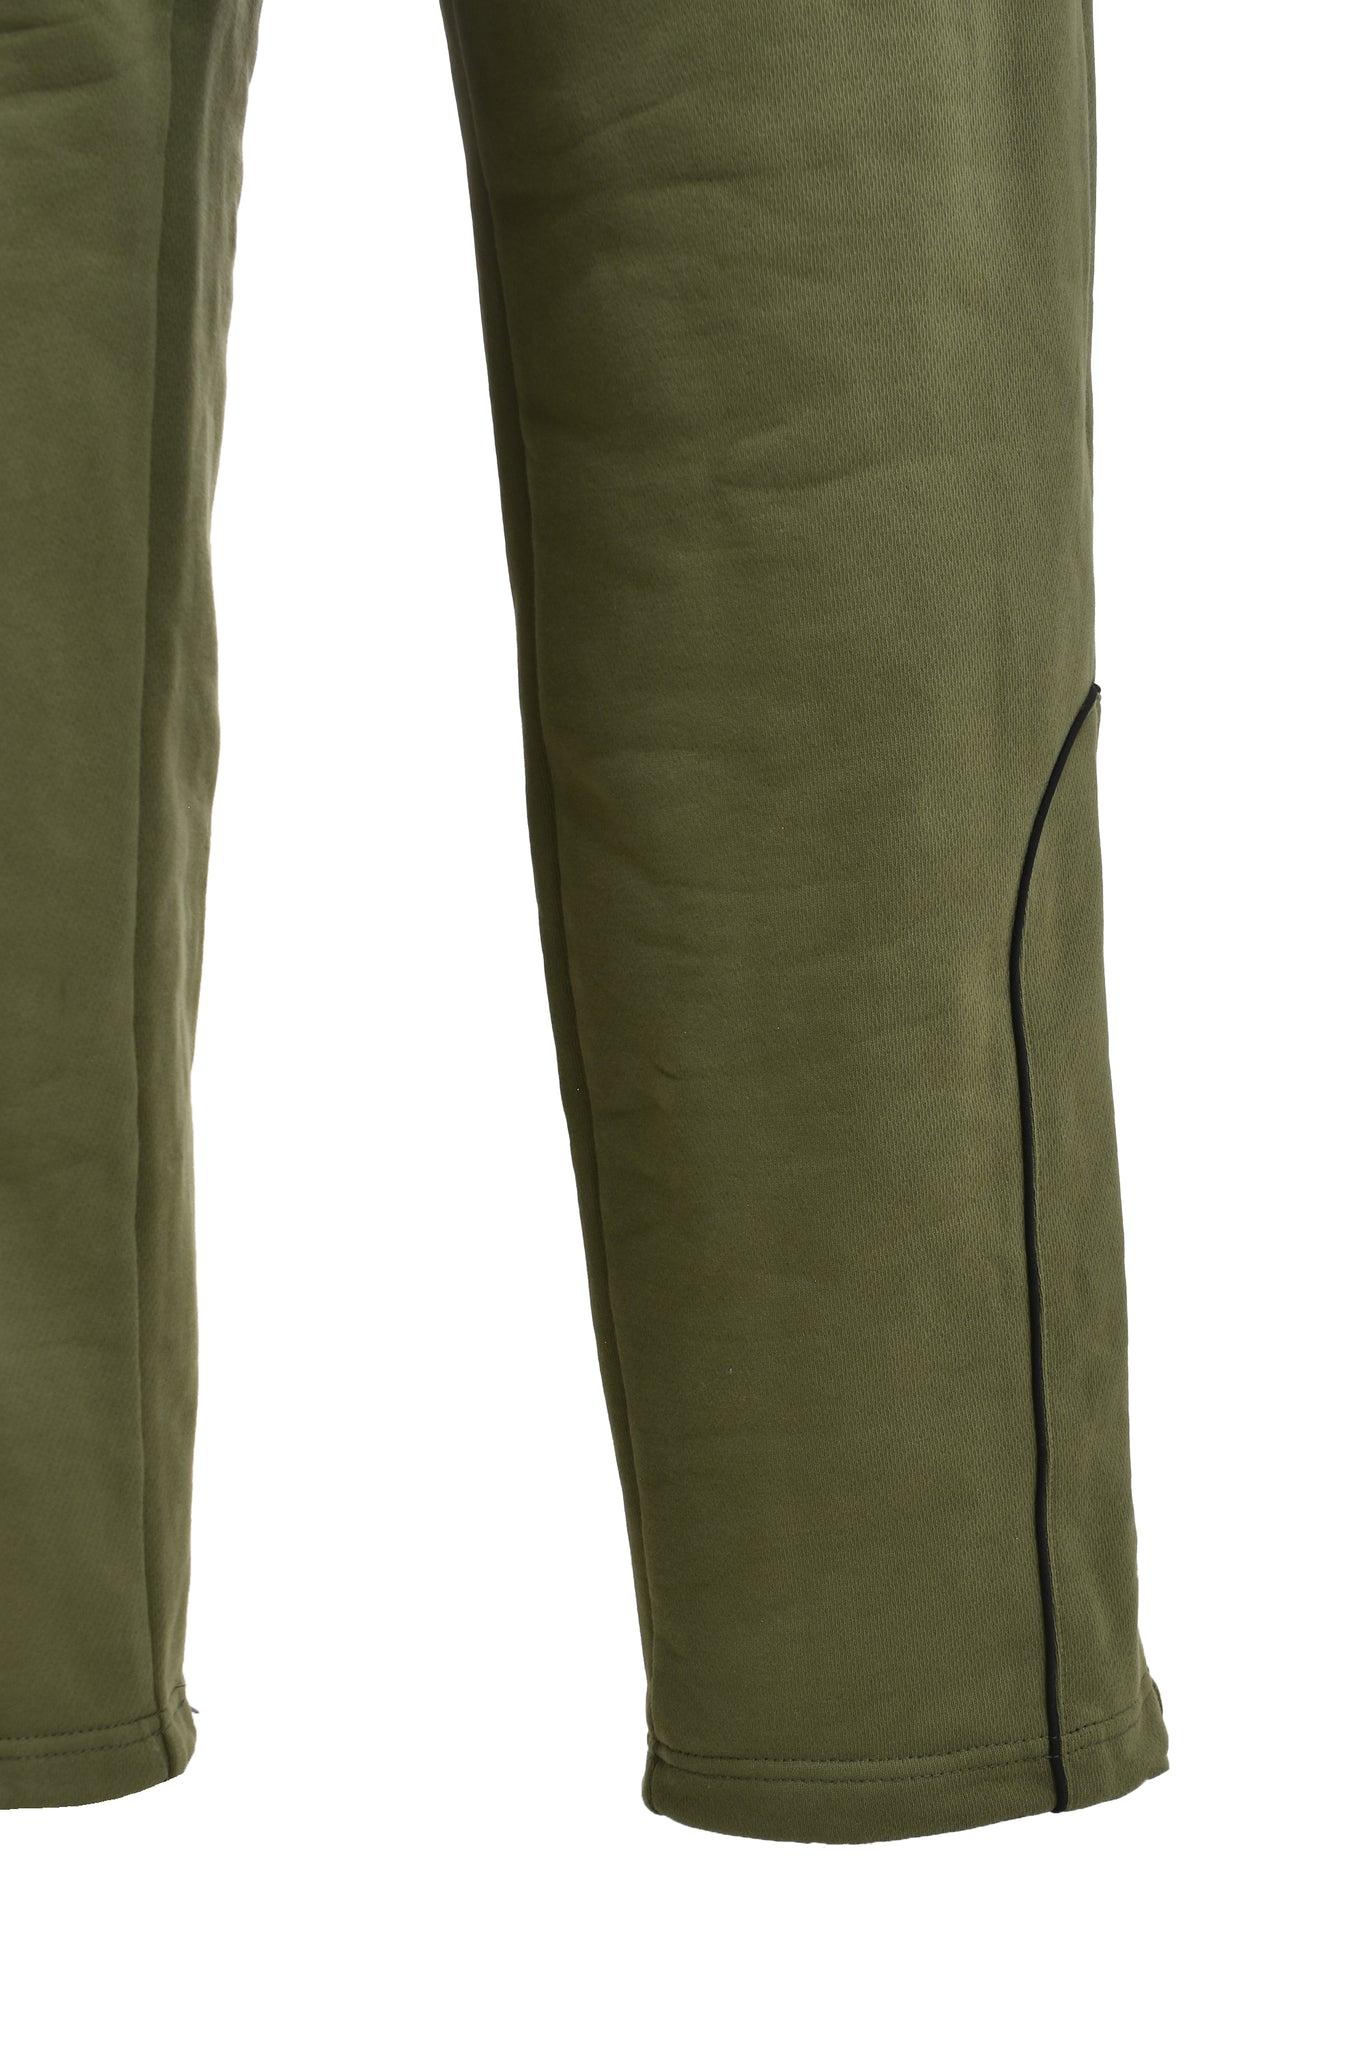 TECH PIPING SWEATPANTS / OLIVE